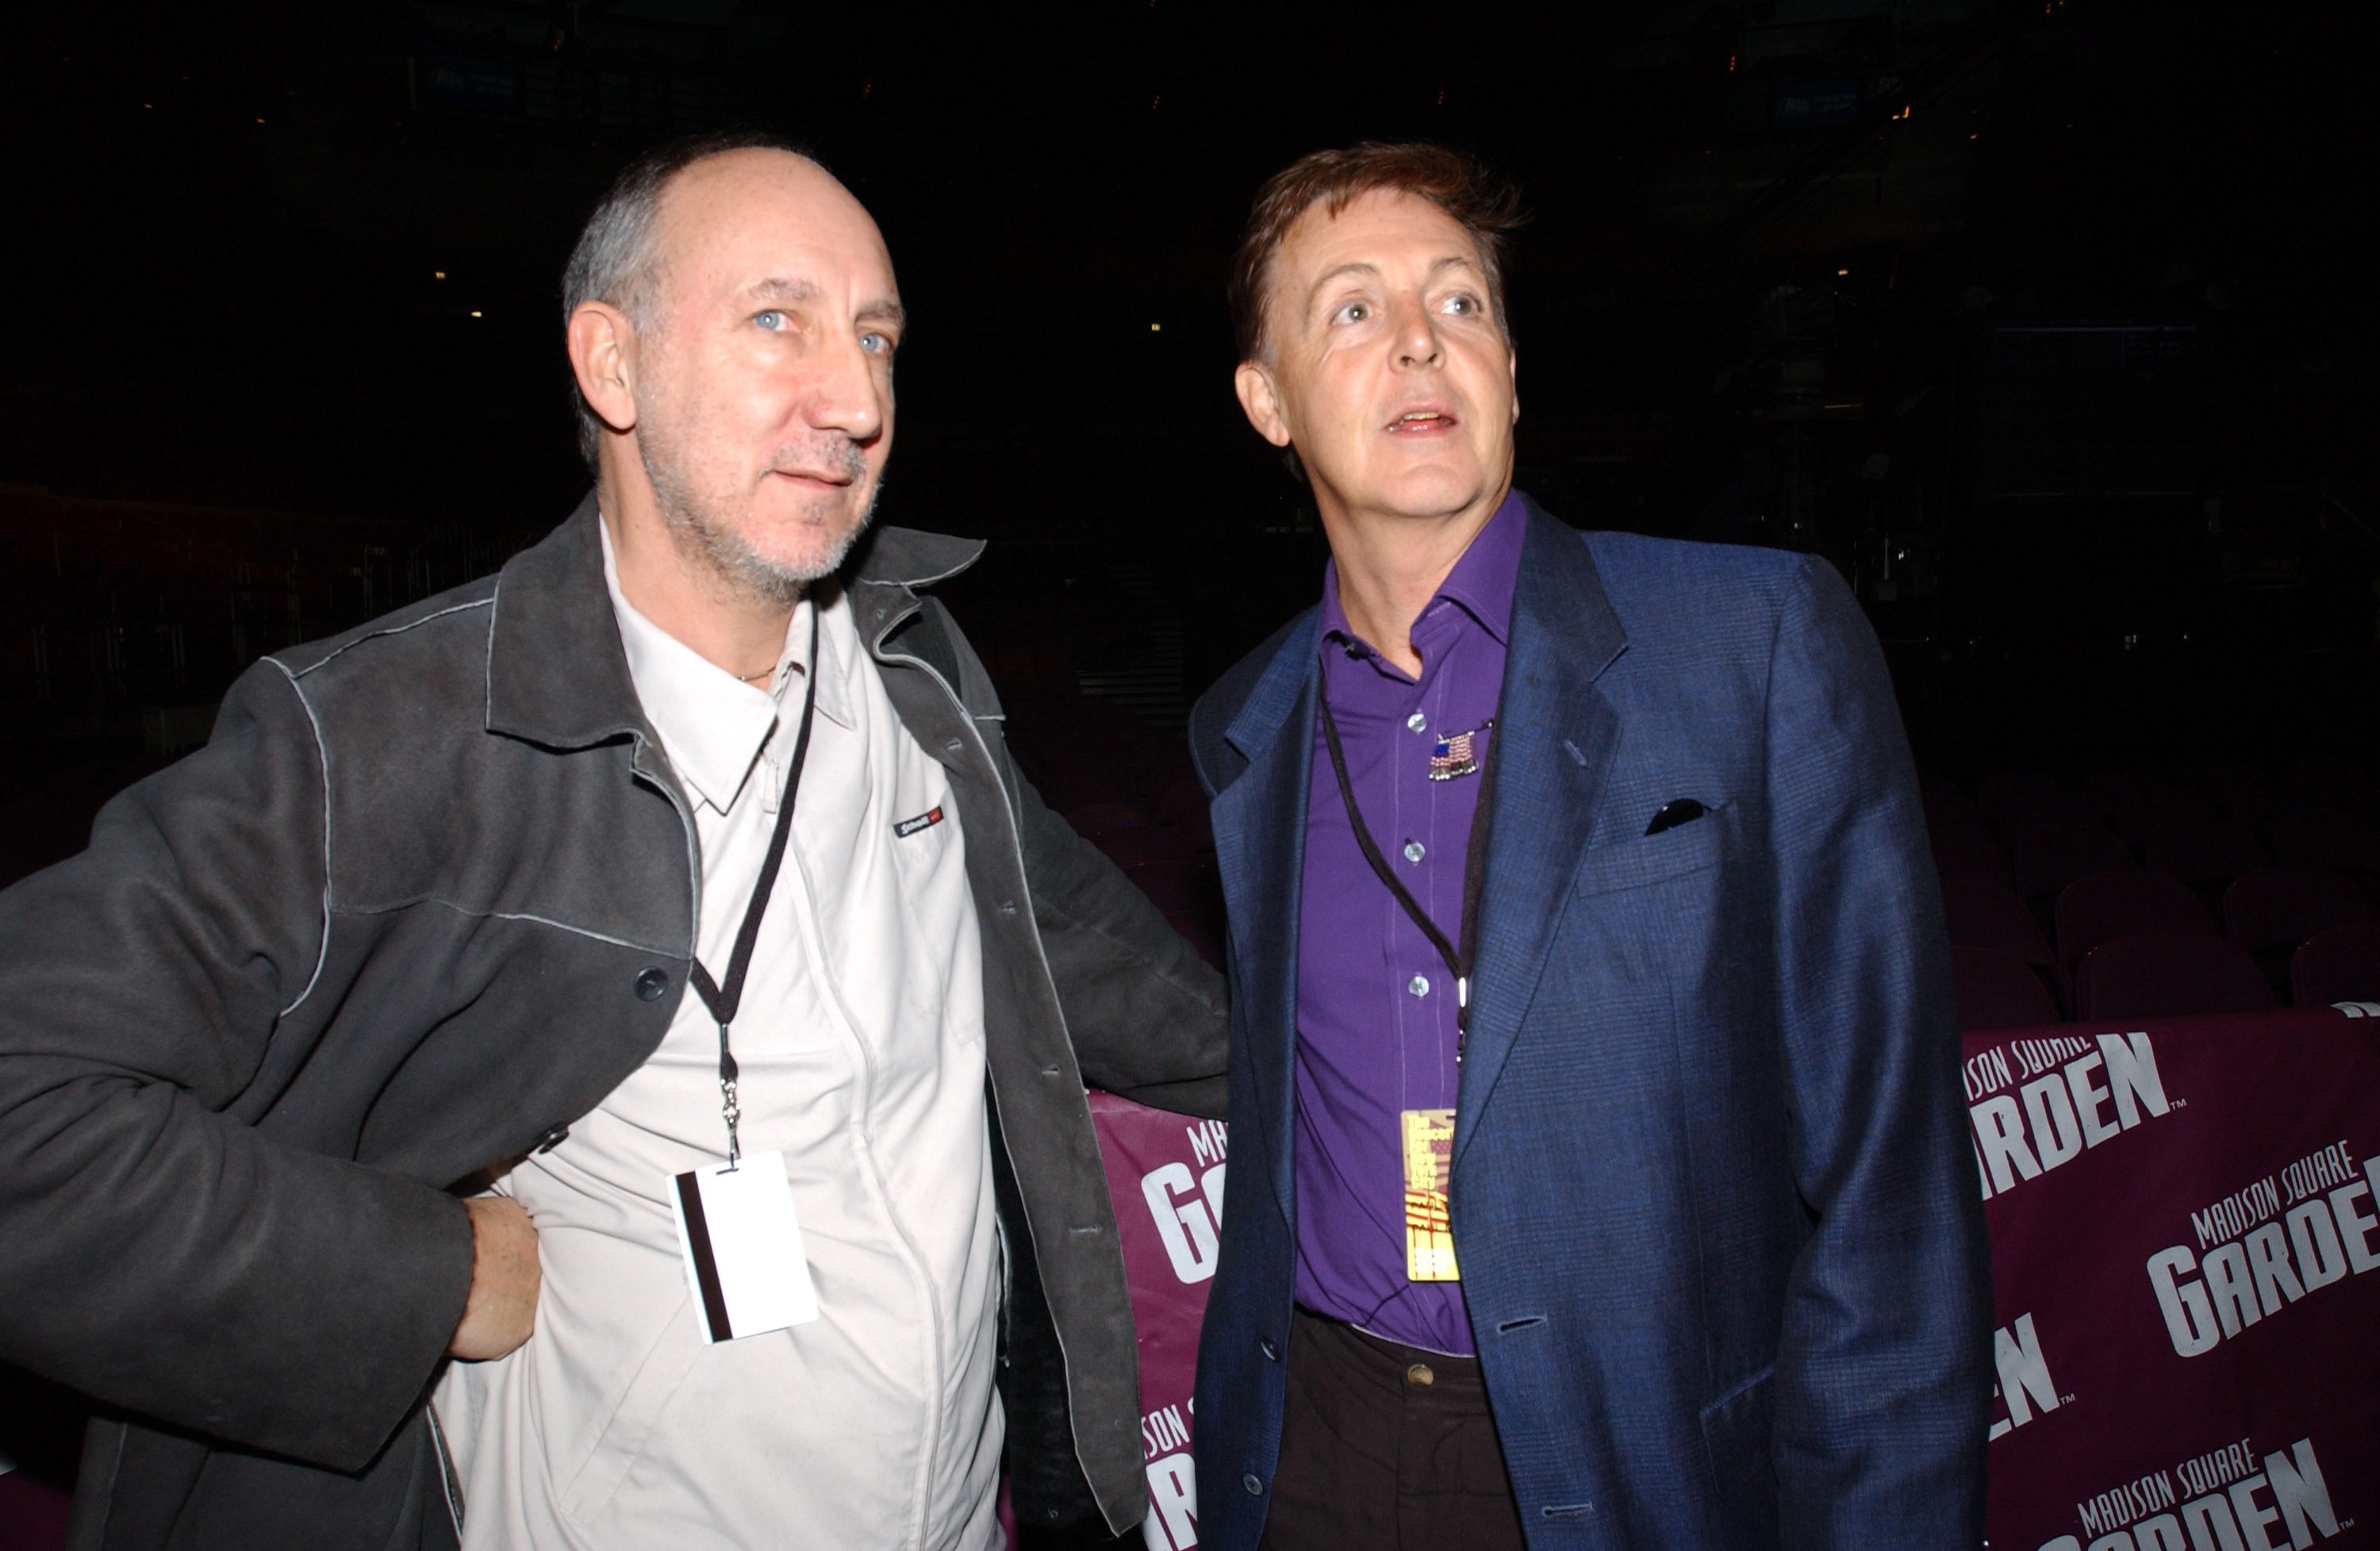 Pete Townshend and Paul McCartney at Madison Square Garden in New York City